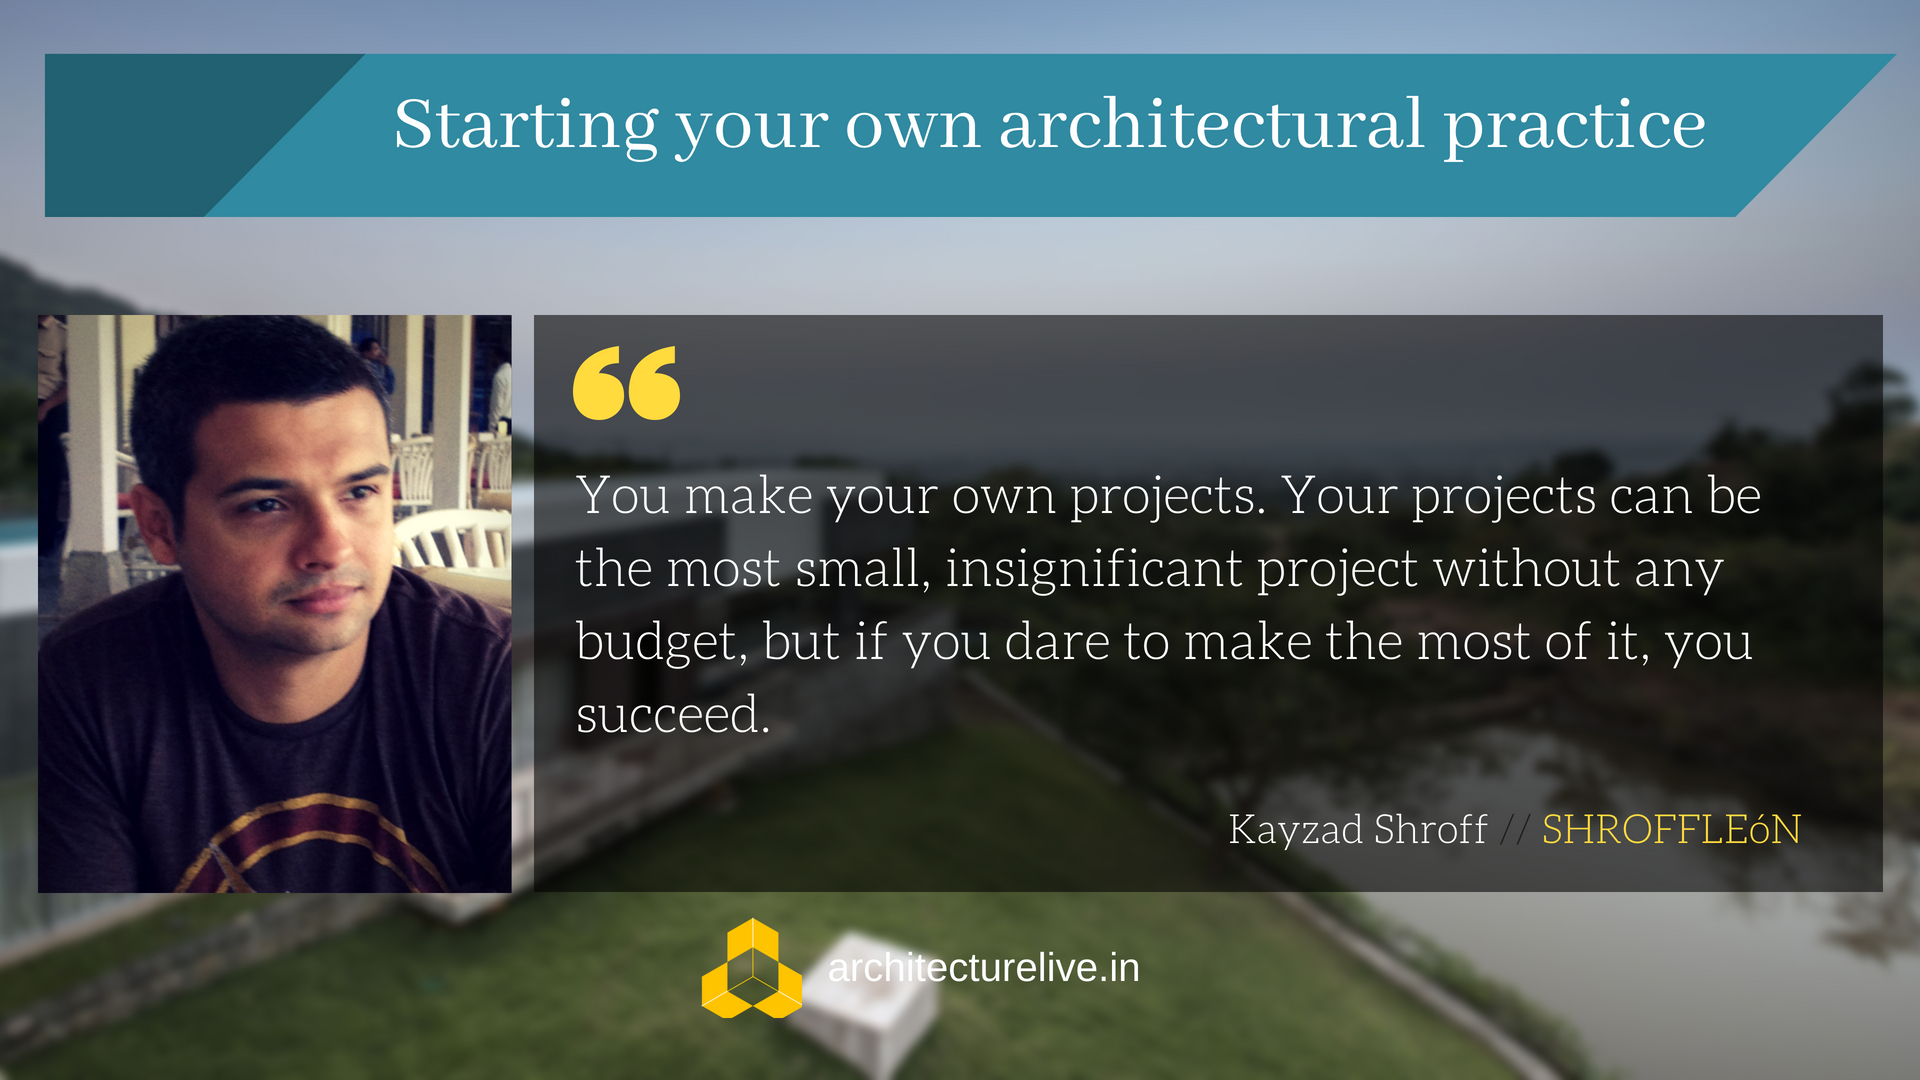 Setting up an architectural practice is slow and grueling process - Kayzad Shroff, SHROFFLEóN 1